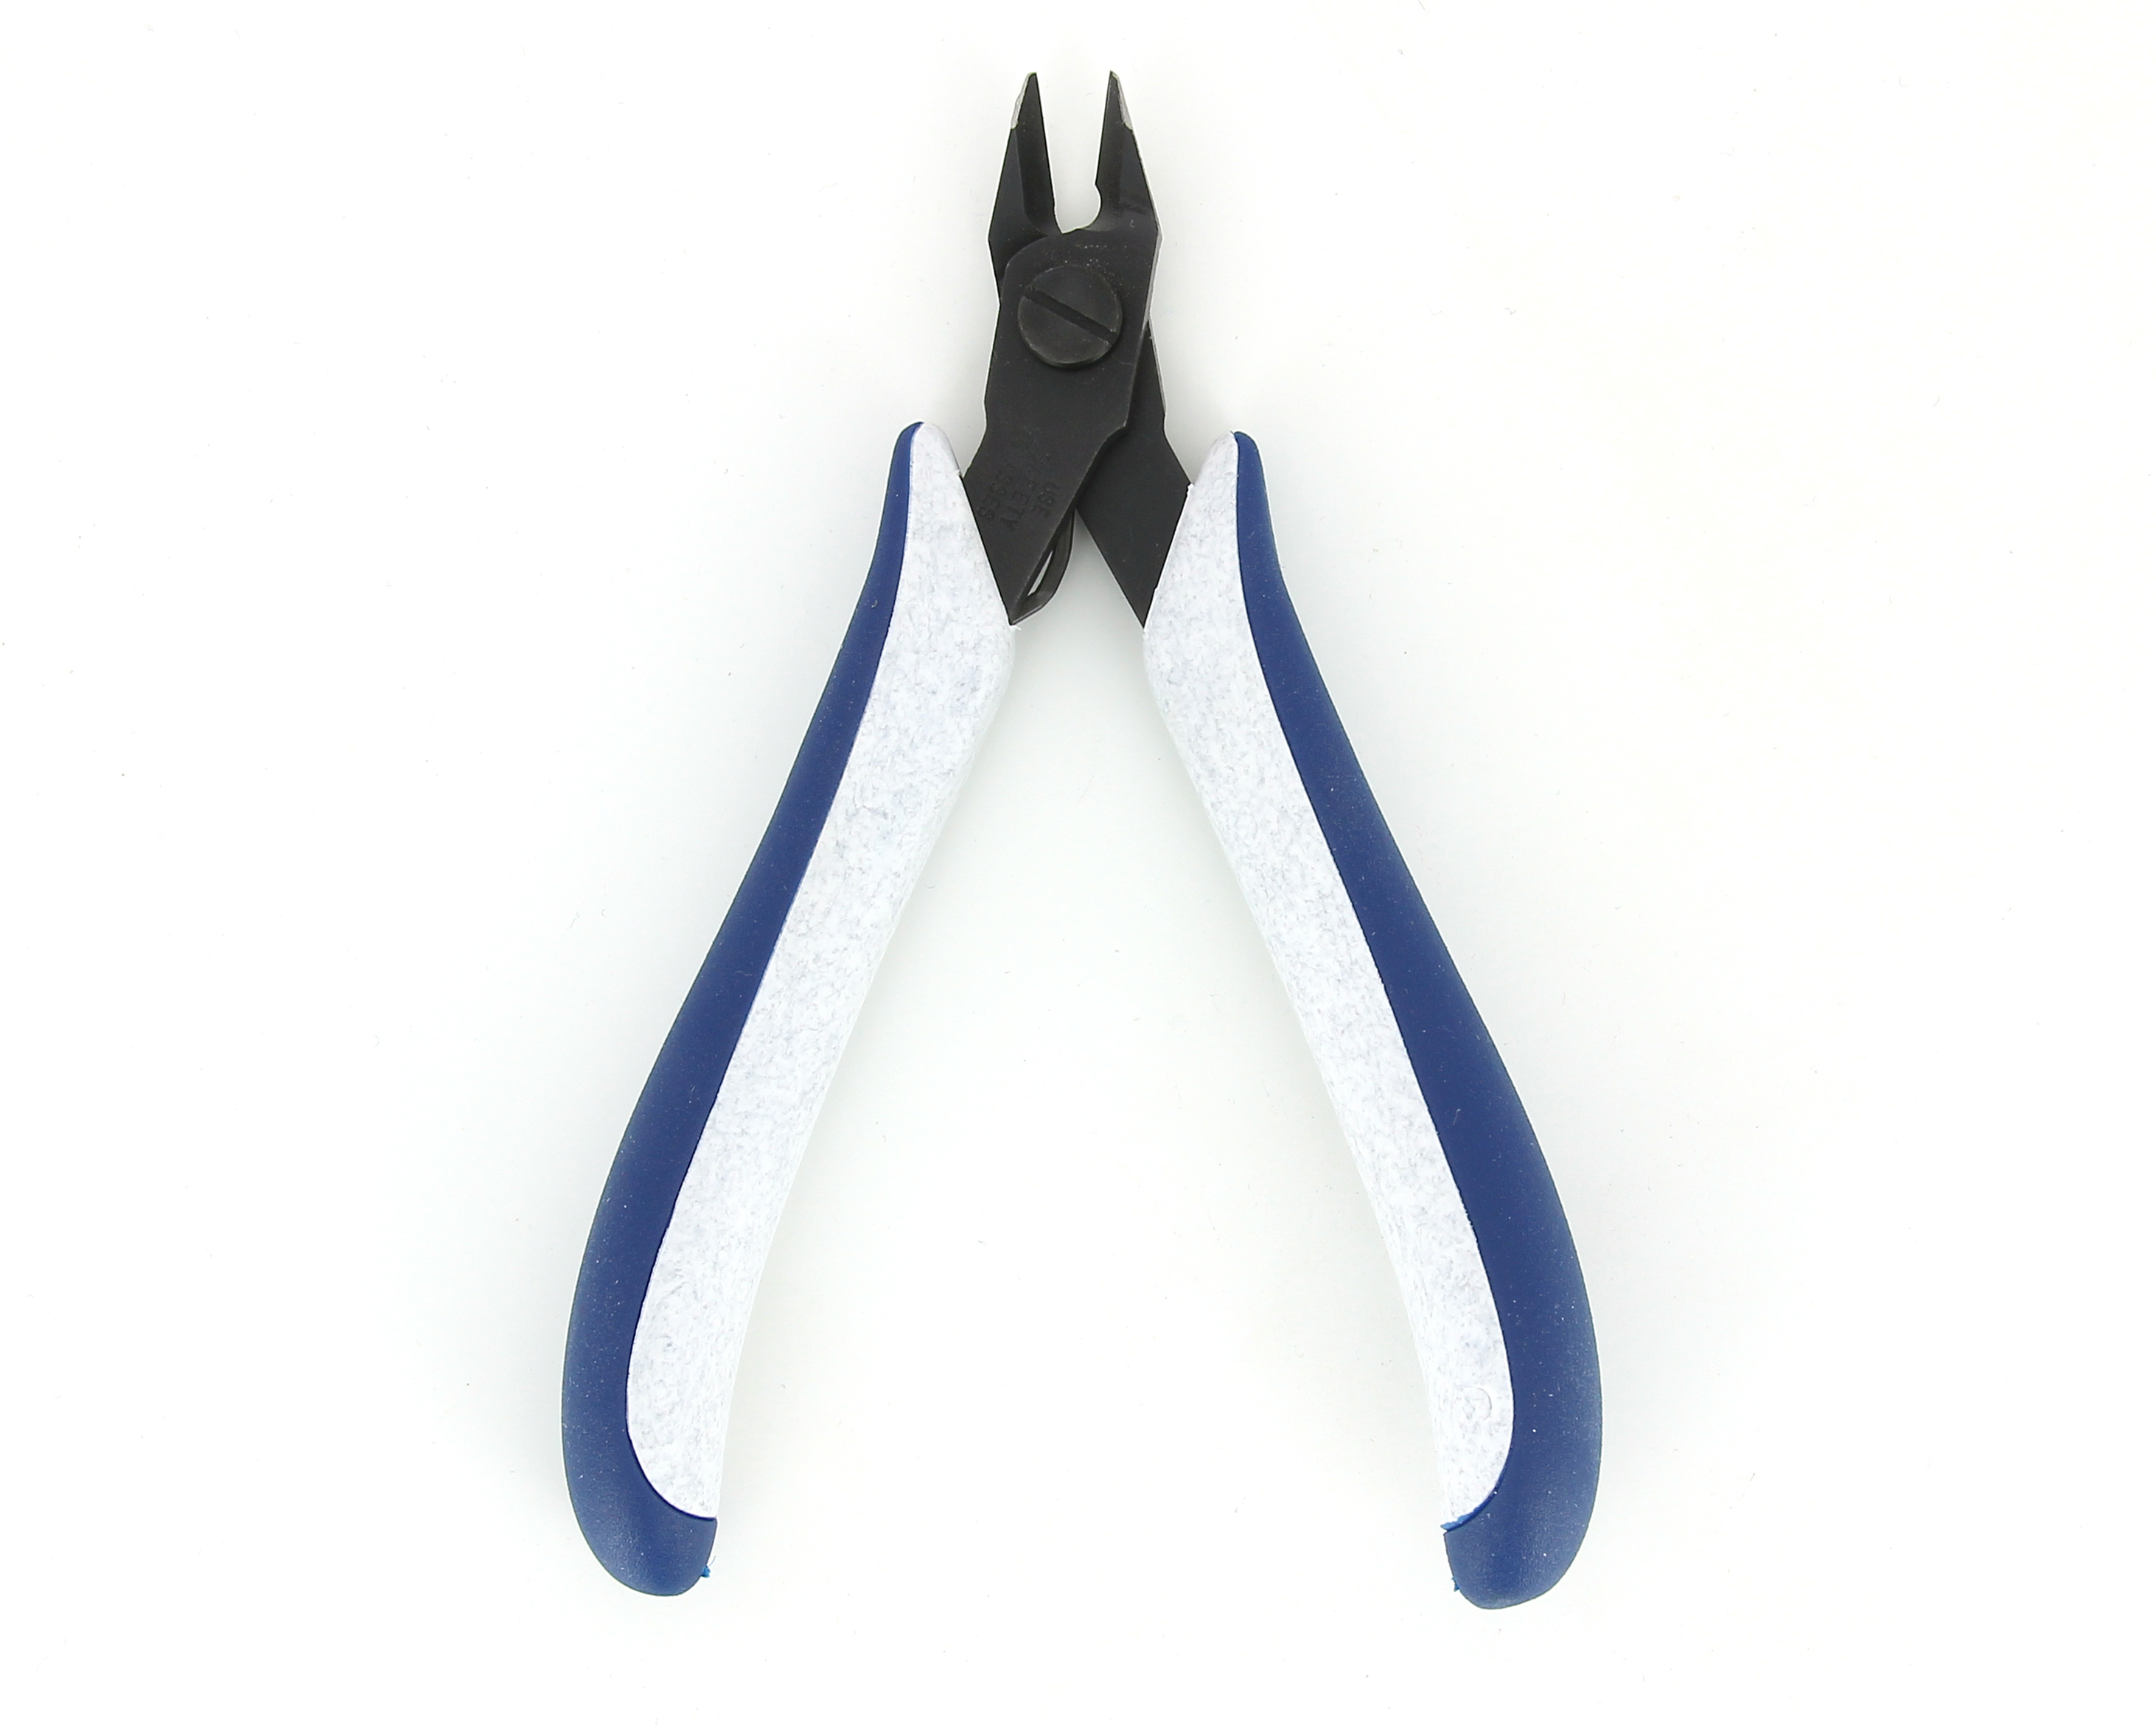 EX9200 - Micro-shears and Micro-pliers